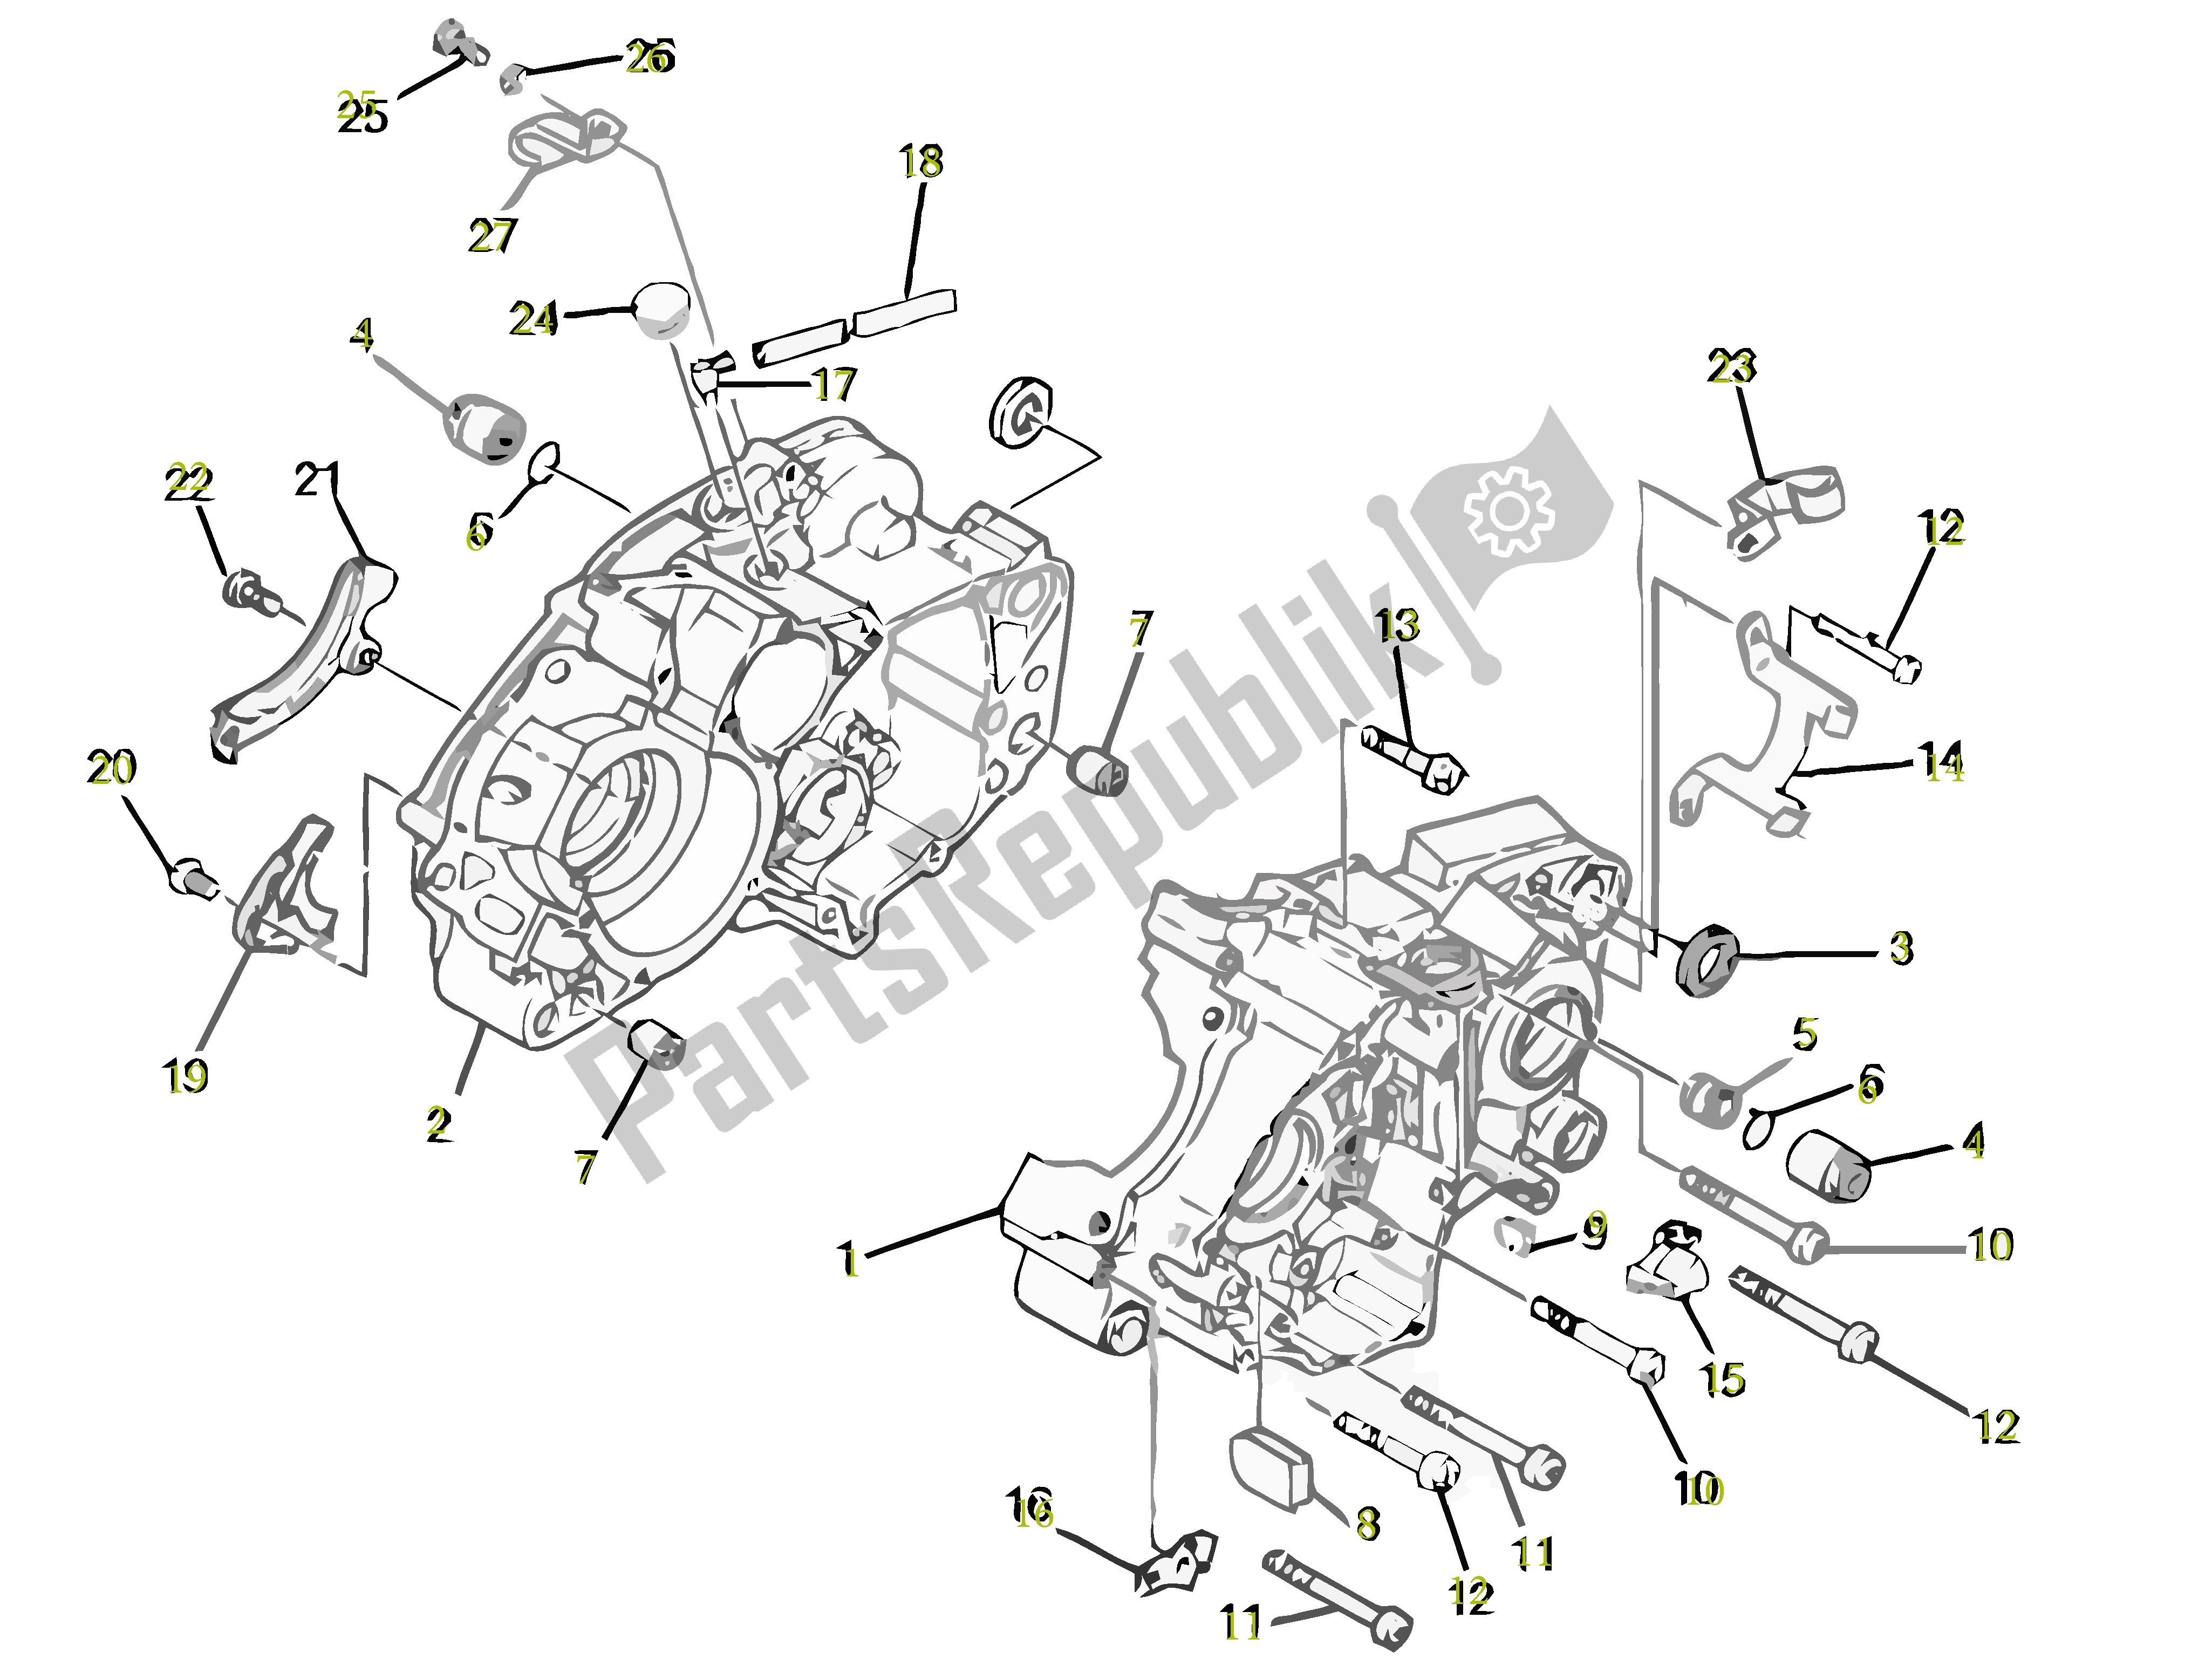 All parts for the Carter of the Gilera SC 125 2007 - 2015